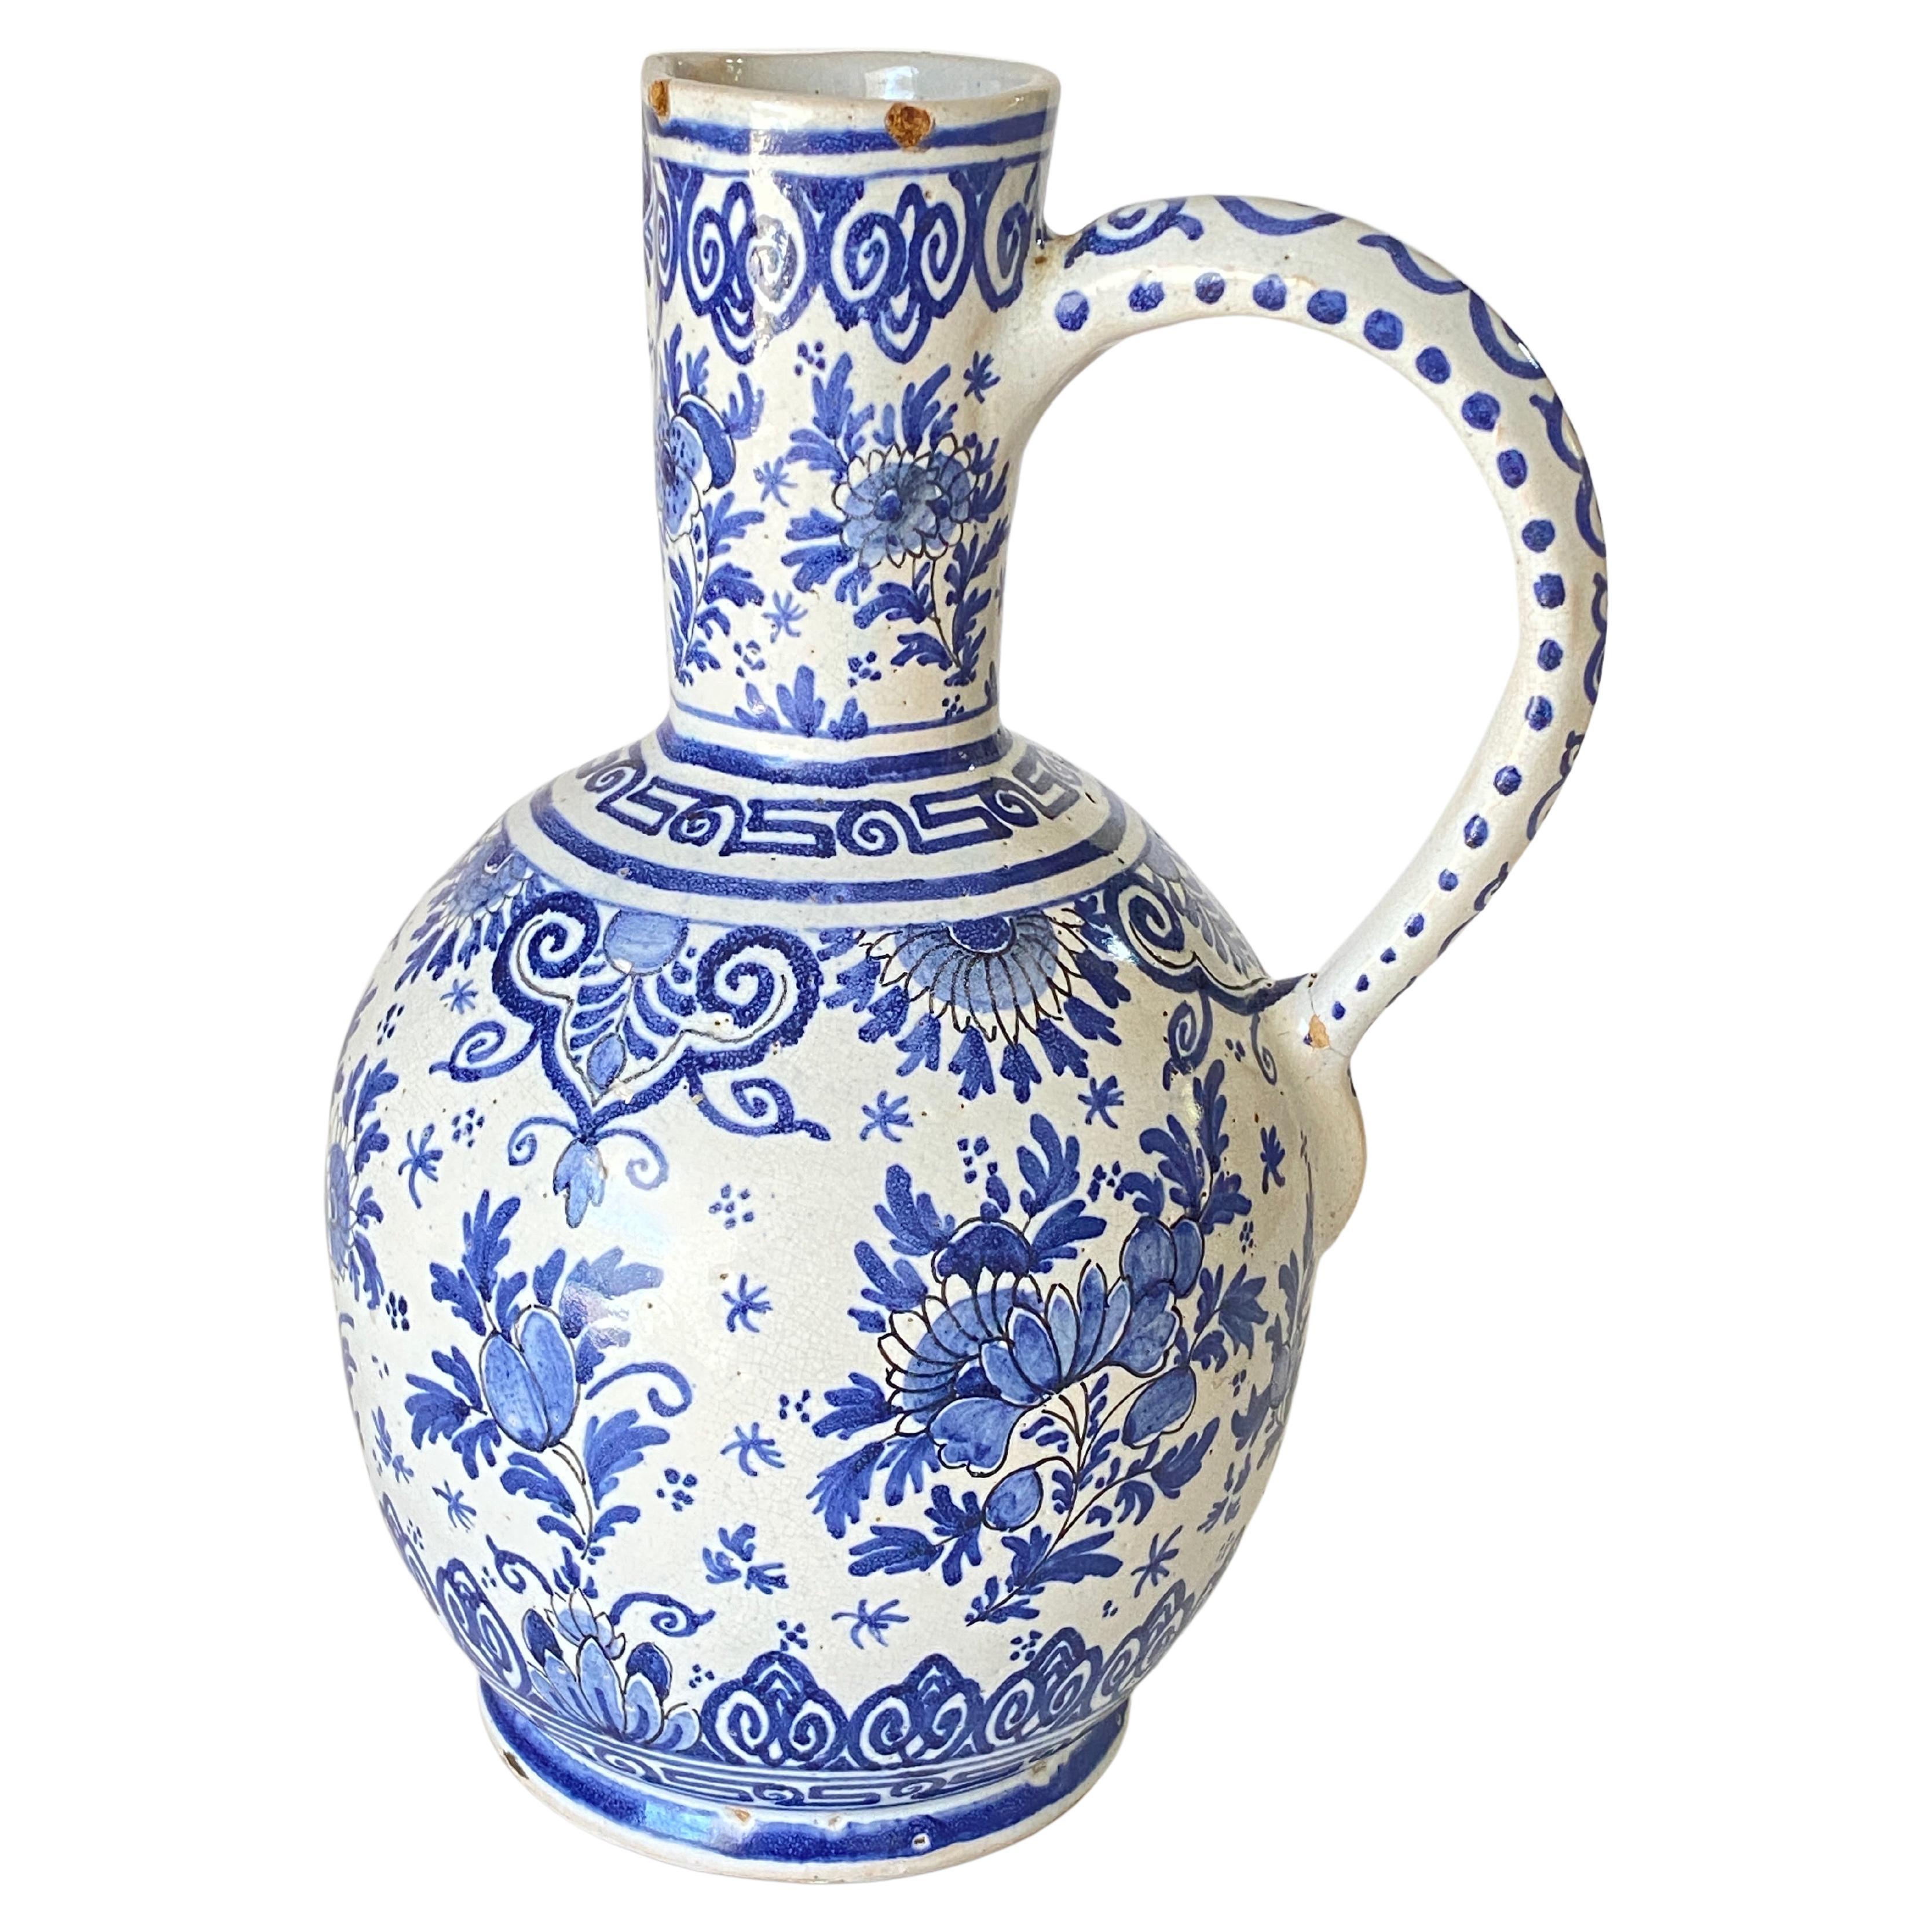 Delft Jug in Faïence, White and Blue, 18eme Century by Adrian Pynacker Signed